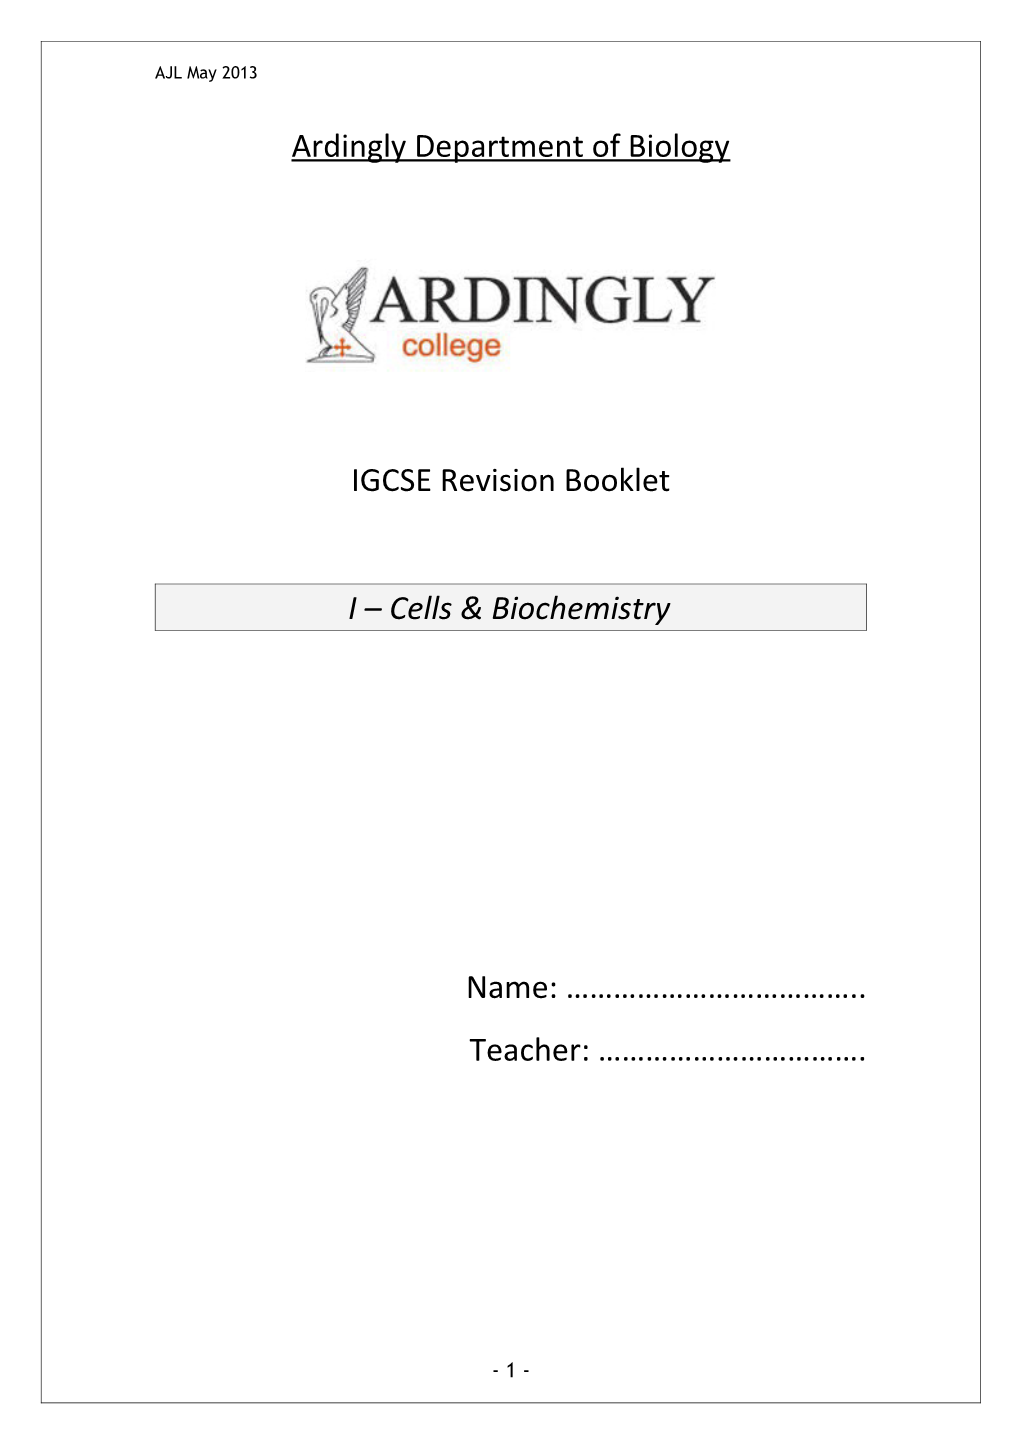 Ardingly Department of Biology